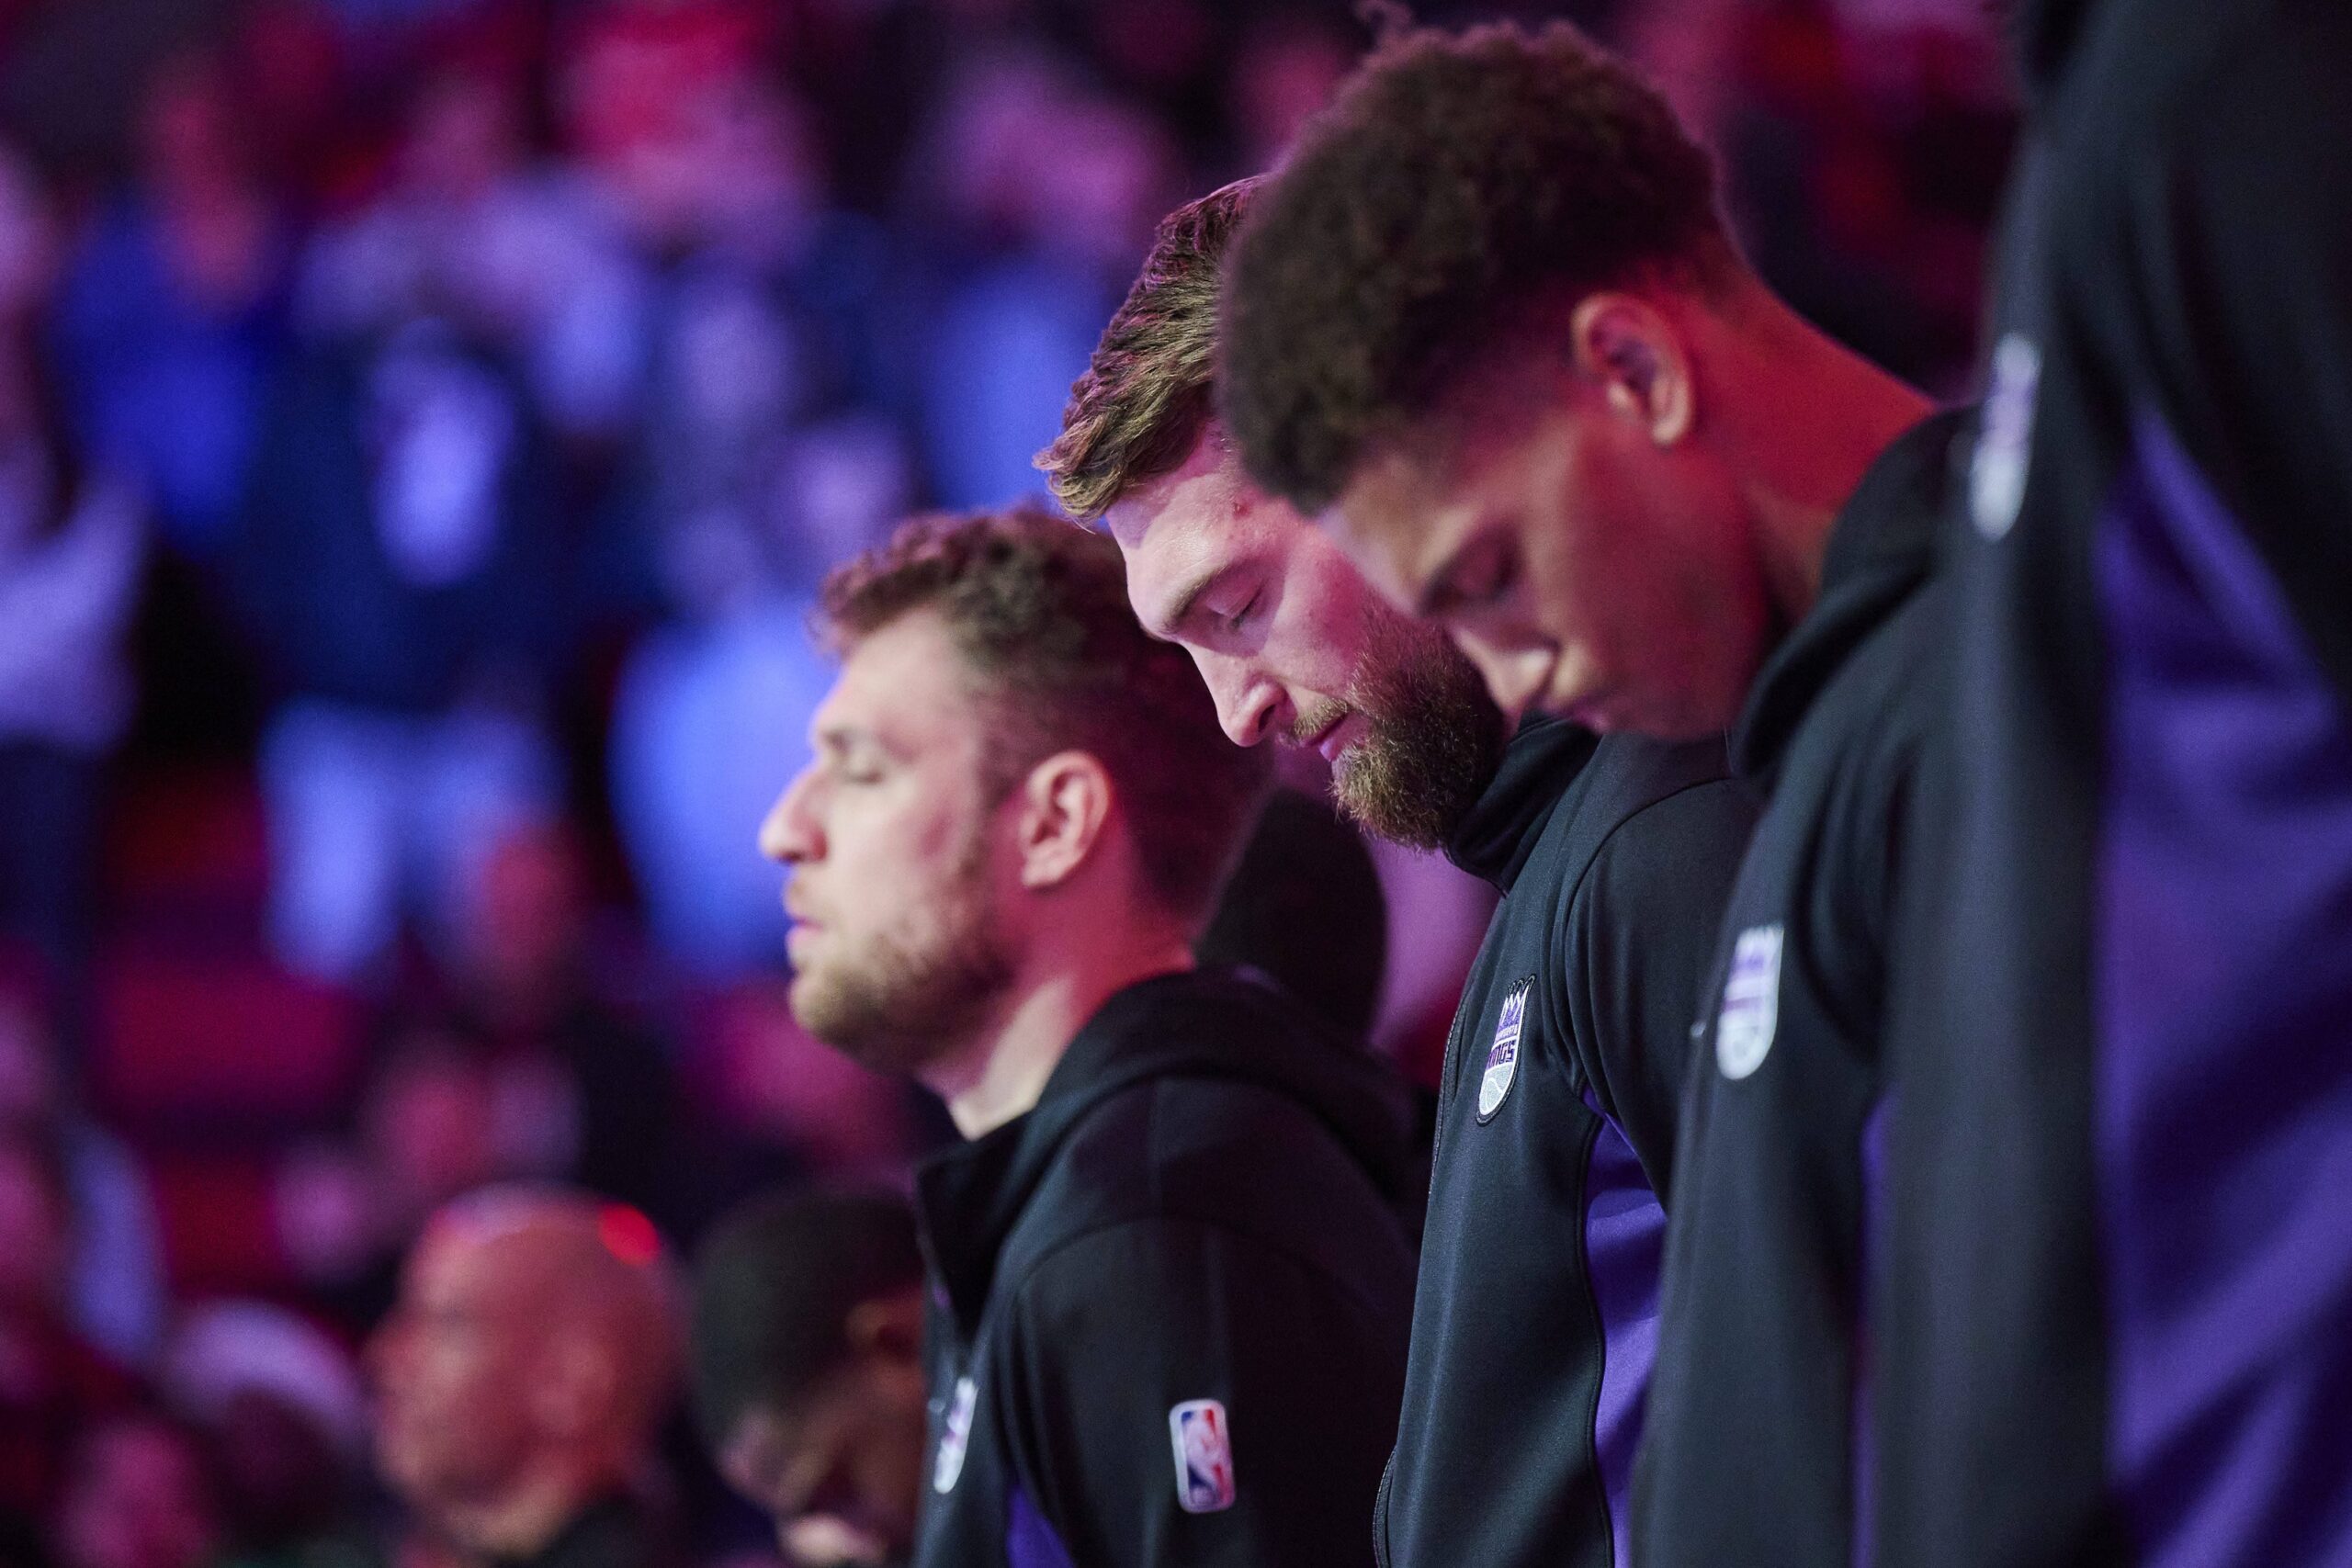 Sacramento Kings forward Domantas Sabonis (10) stands with teammates during the singing of the national anthem before a game against the Portland Trail Blazers at Moda Center.